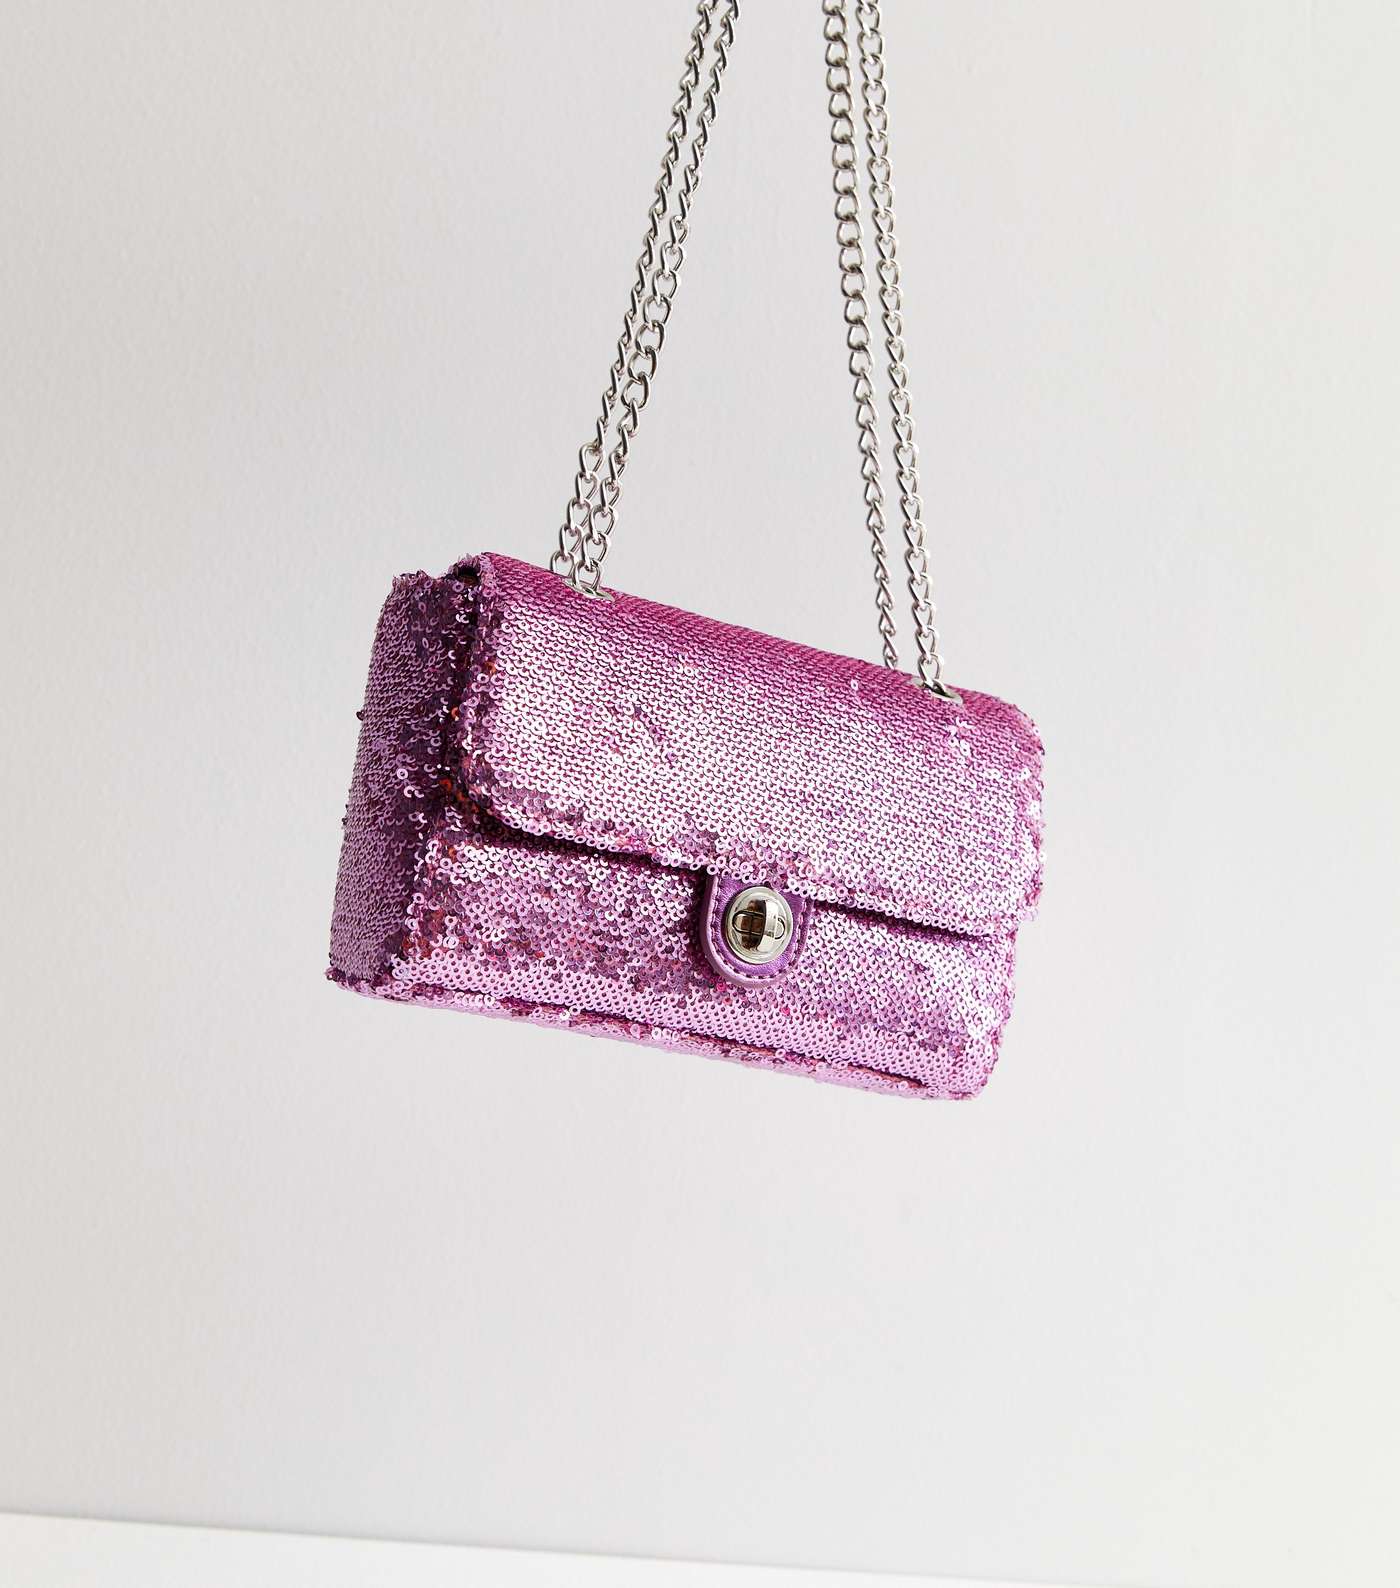 Bright Pink Sequin Chain Cross Body Bag Image 3